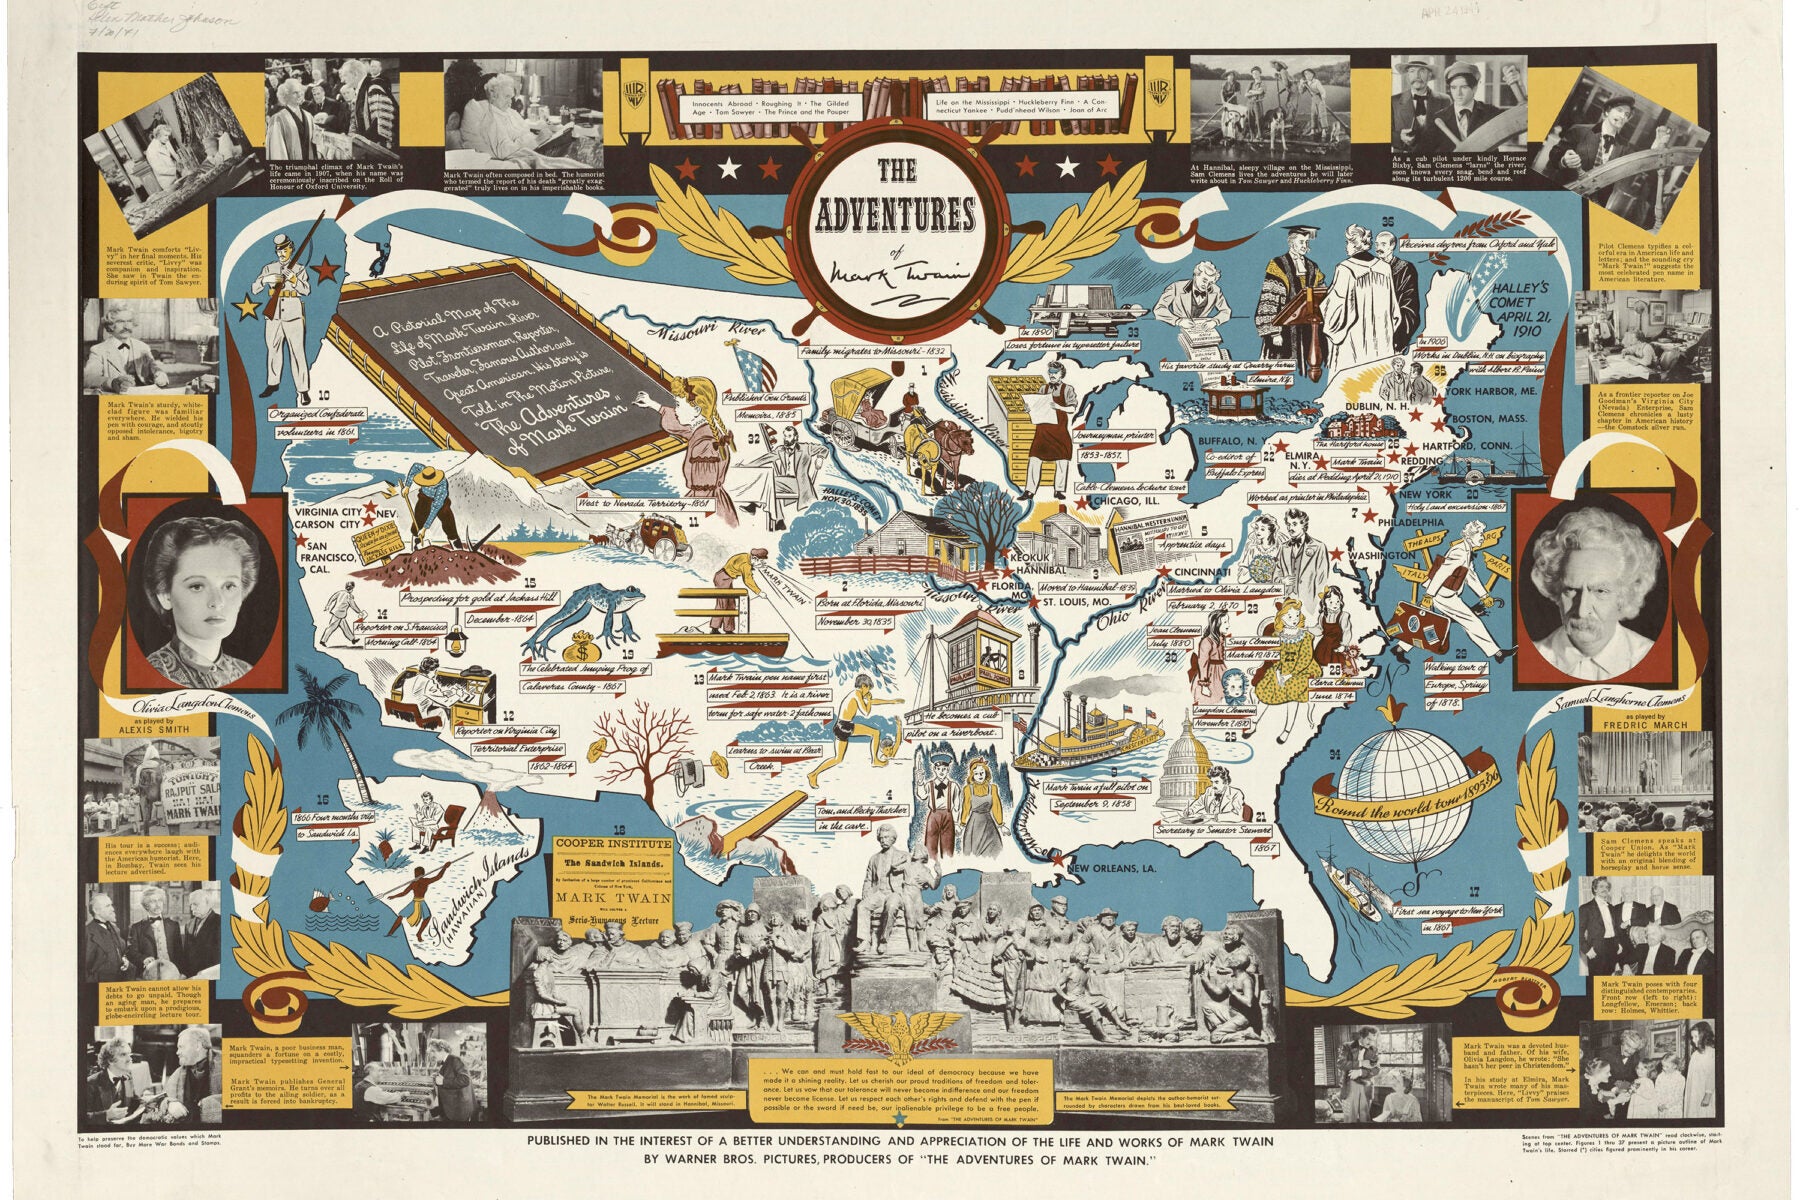 a pictorial map of the life of Mark Twain